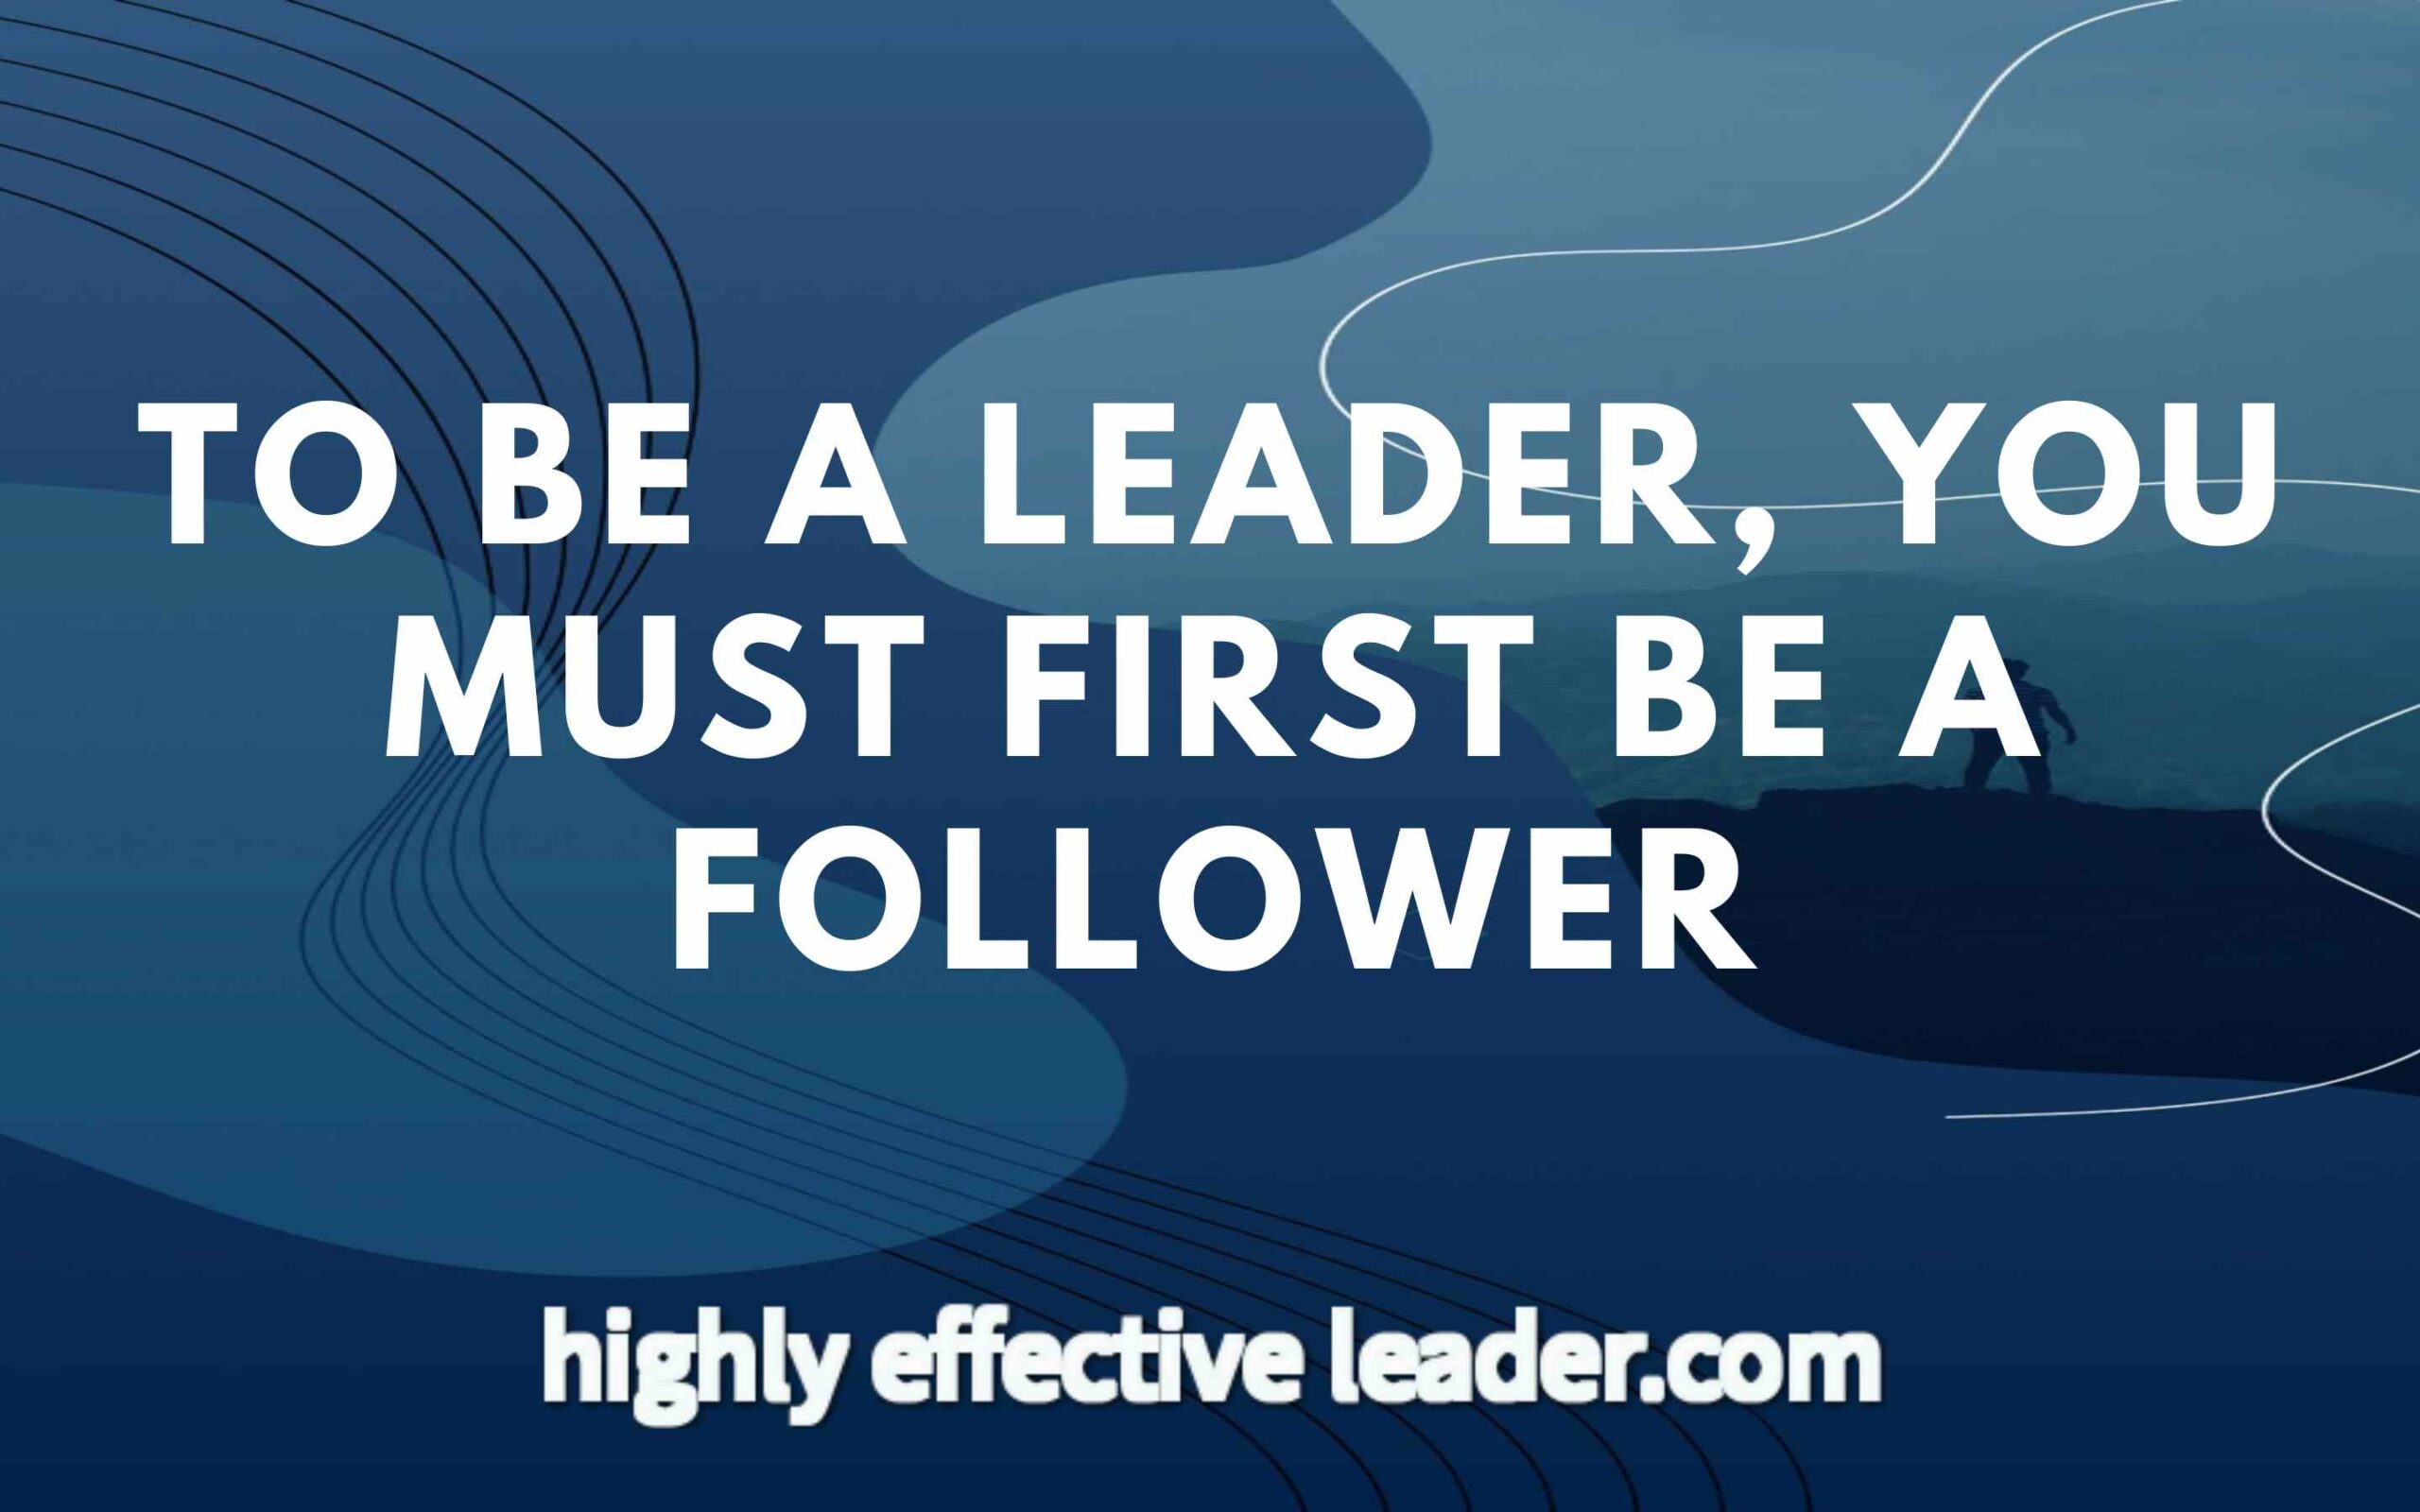 Do You Have A Leader?